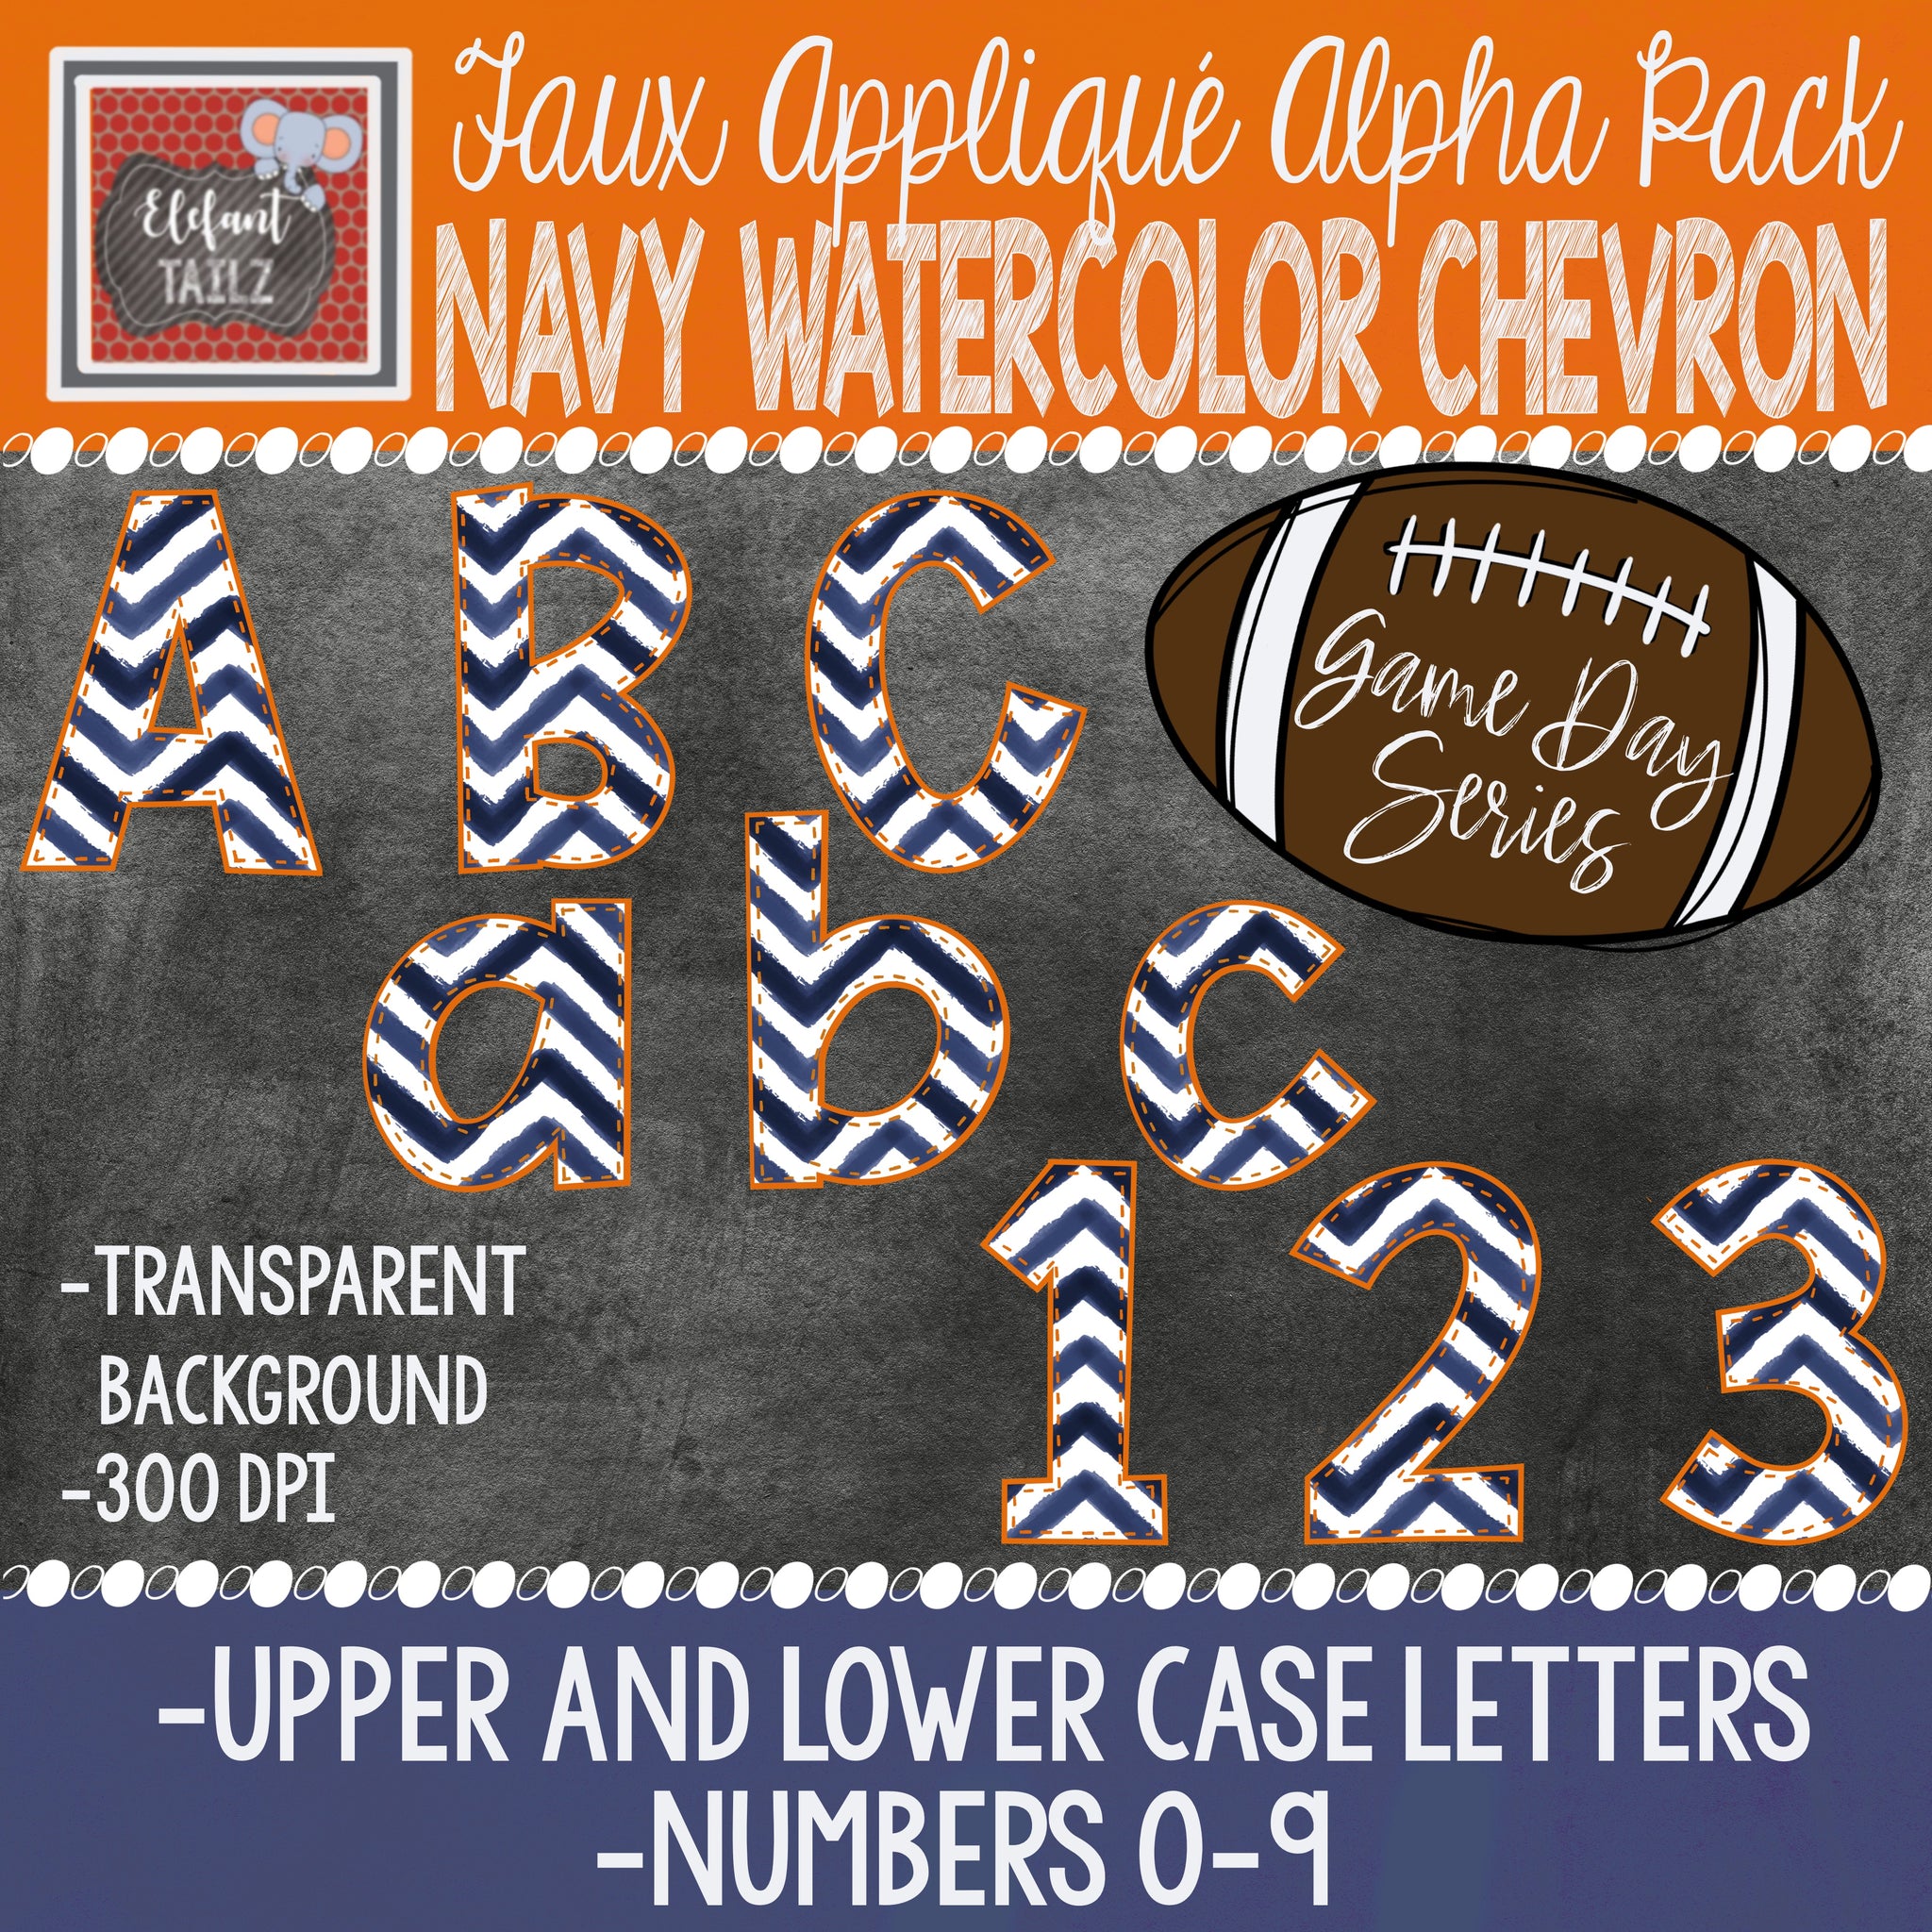 Game Day Series Alpha & Number Pack - Navy Watercolor Chevron